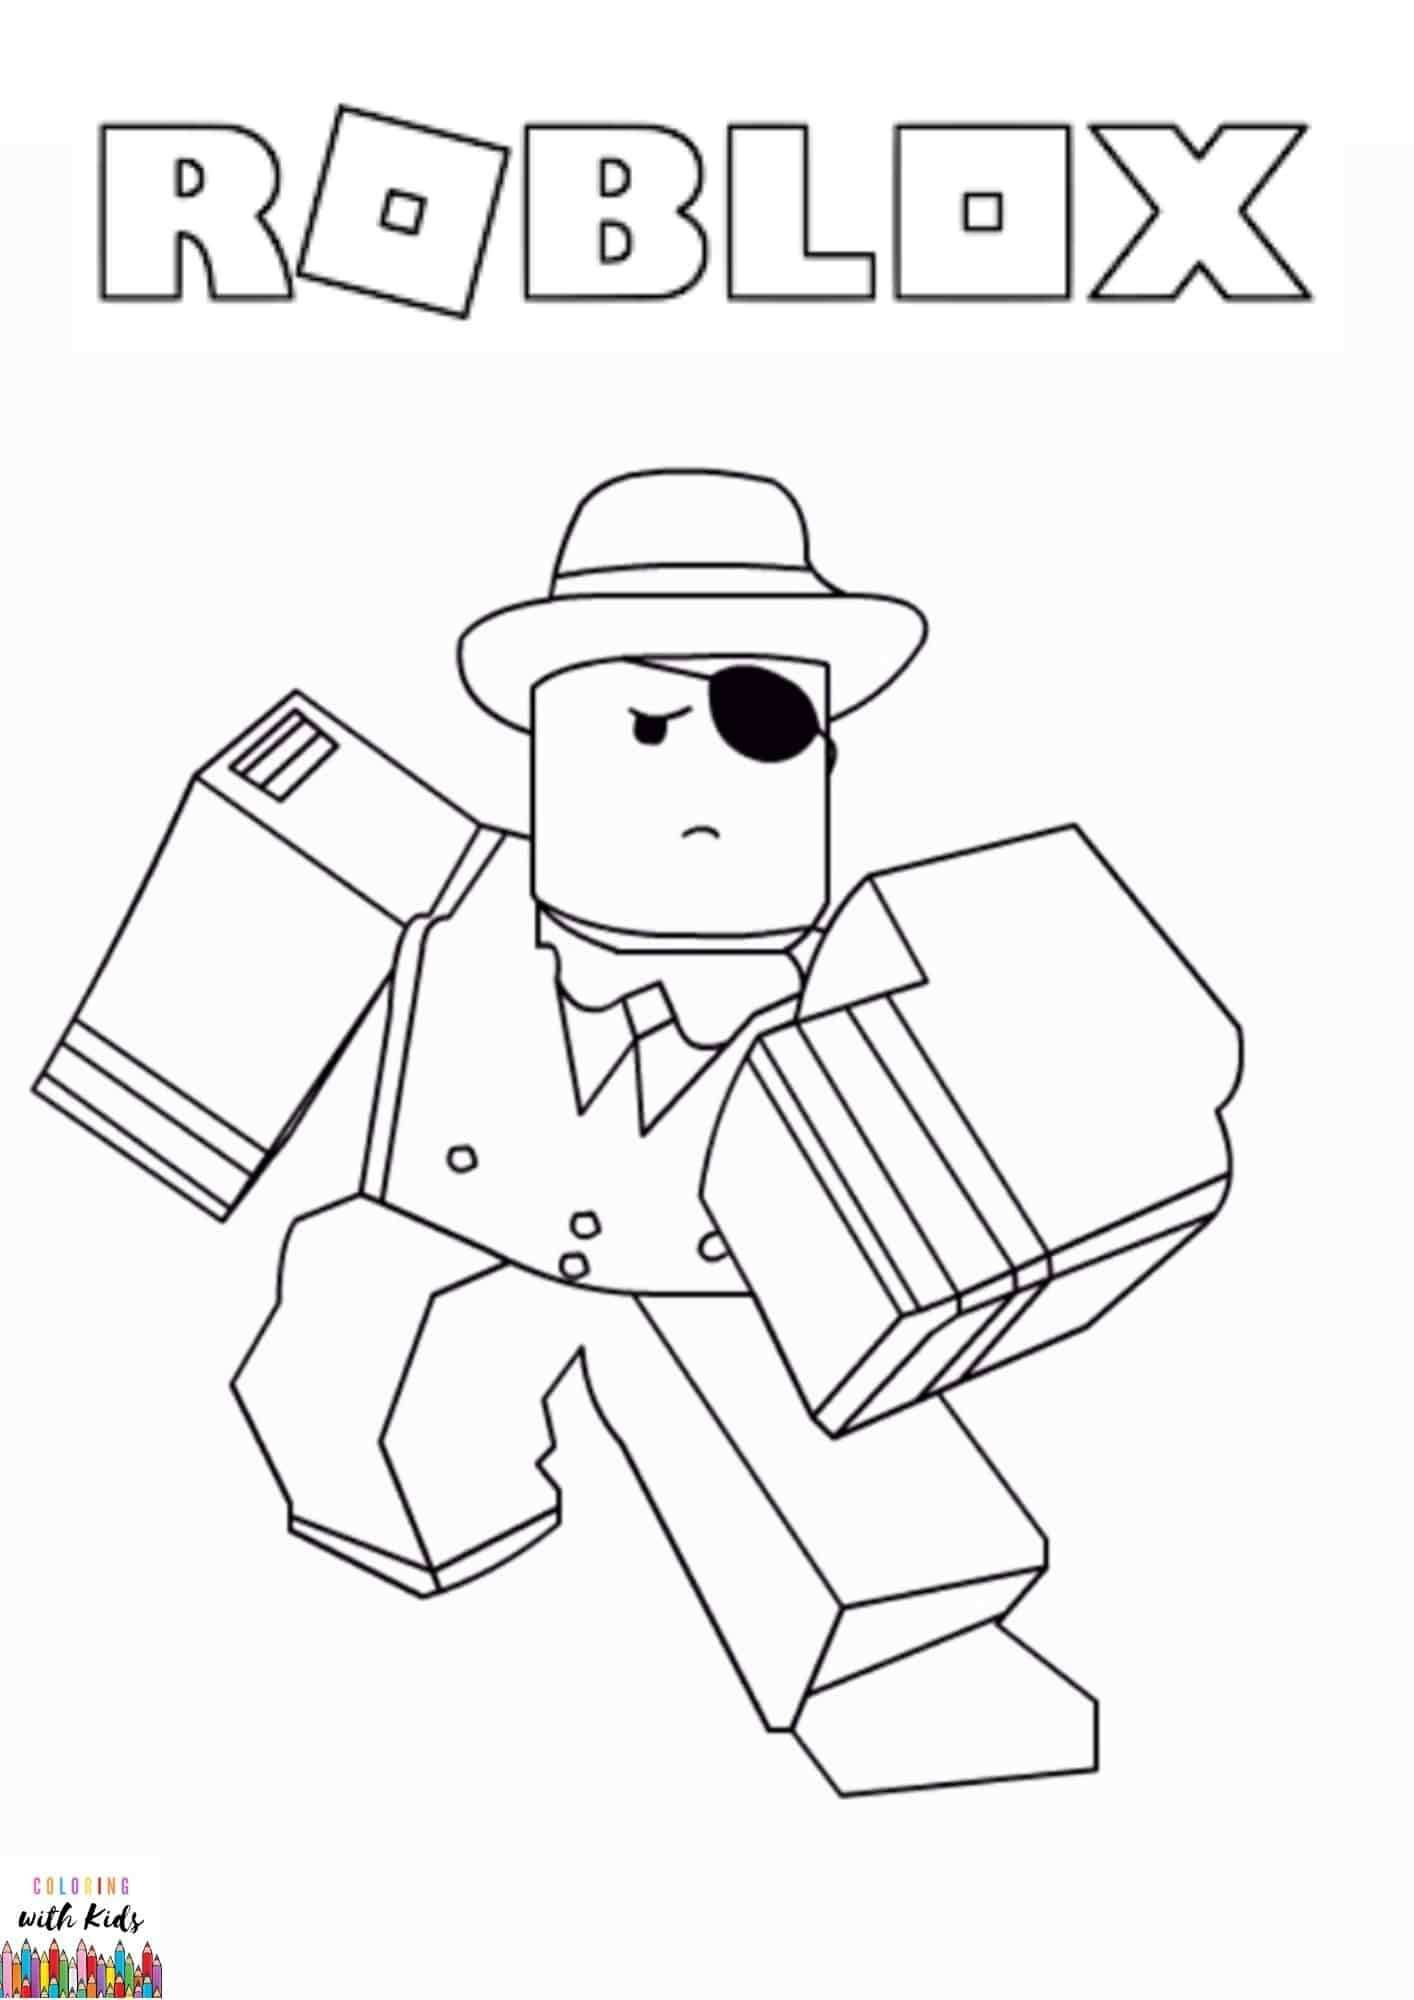 Roblox Coloring Page Image Credit Roblox Avatar Drawing By Yadia Chenia Permission Fo